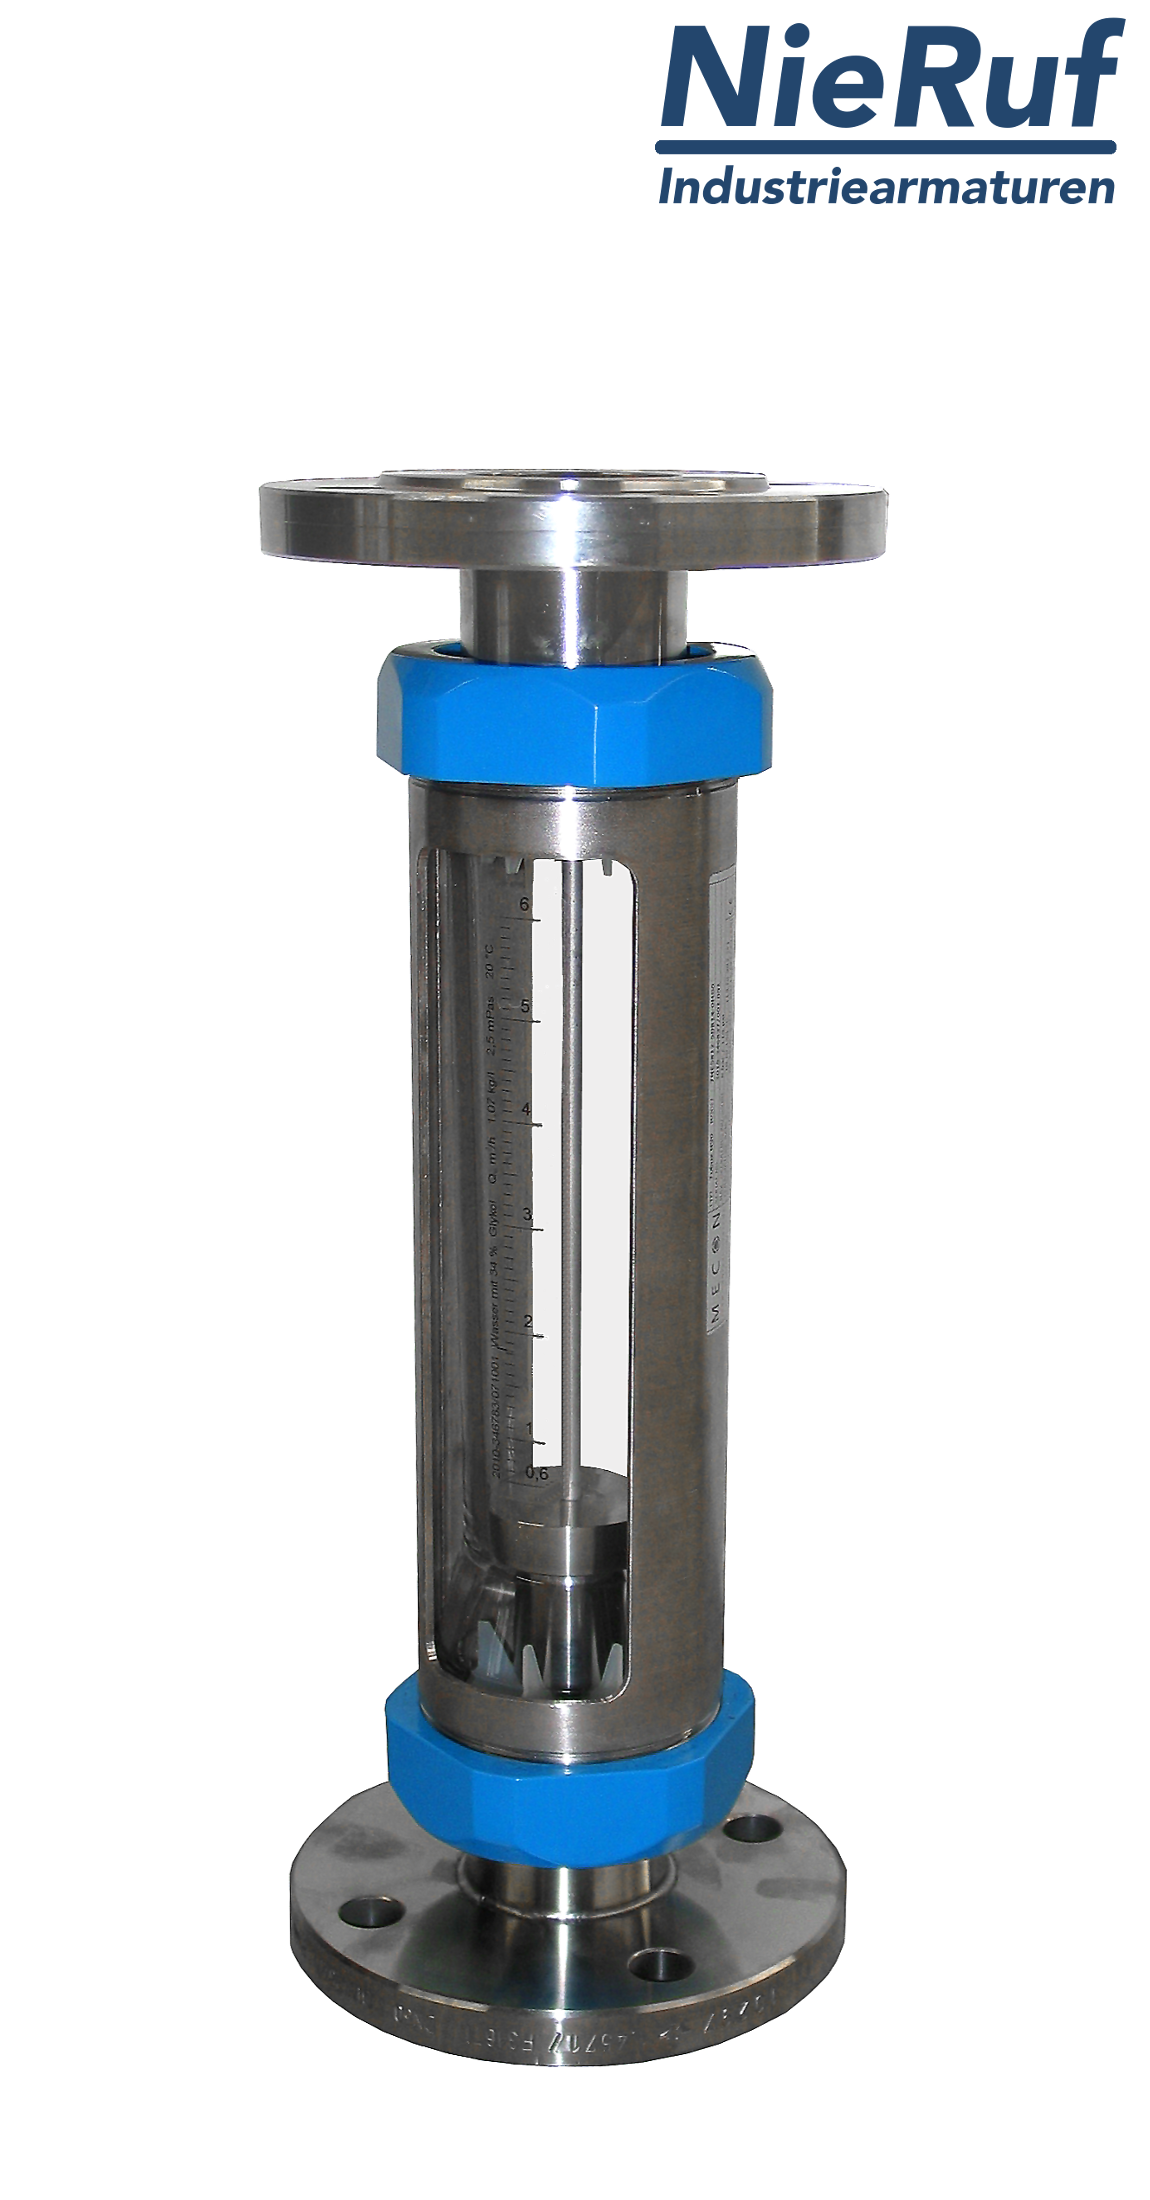 Variable area flowmeter stainless steel + borosilicate flange DN25 160.0 - 1600 l/h water FKM